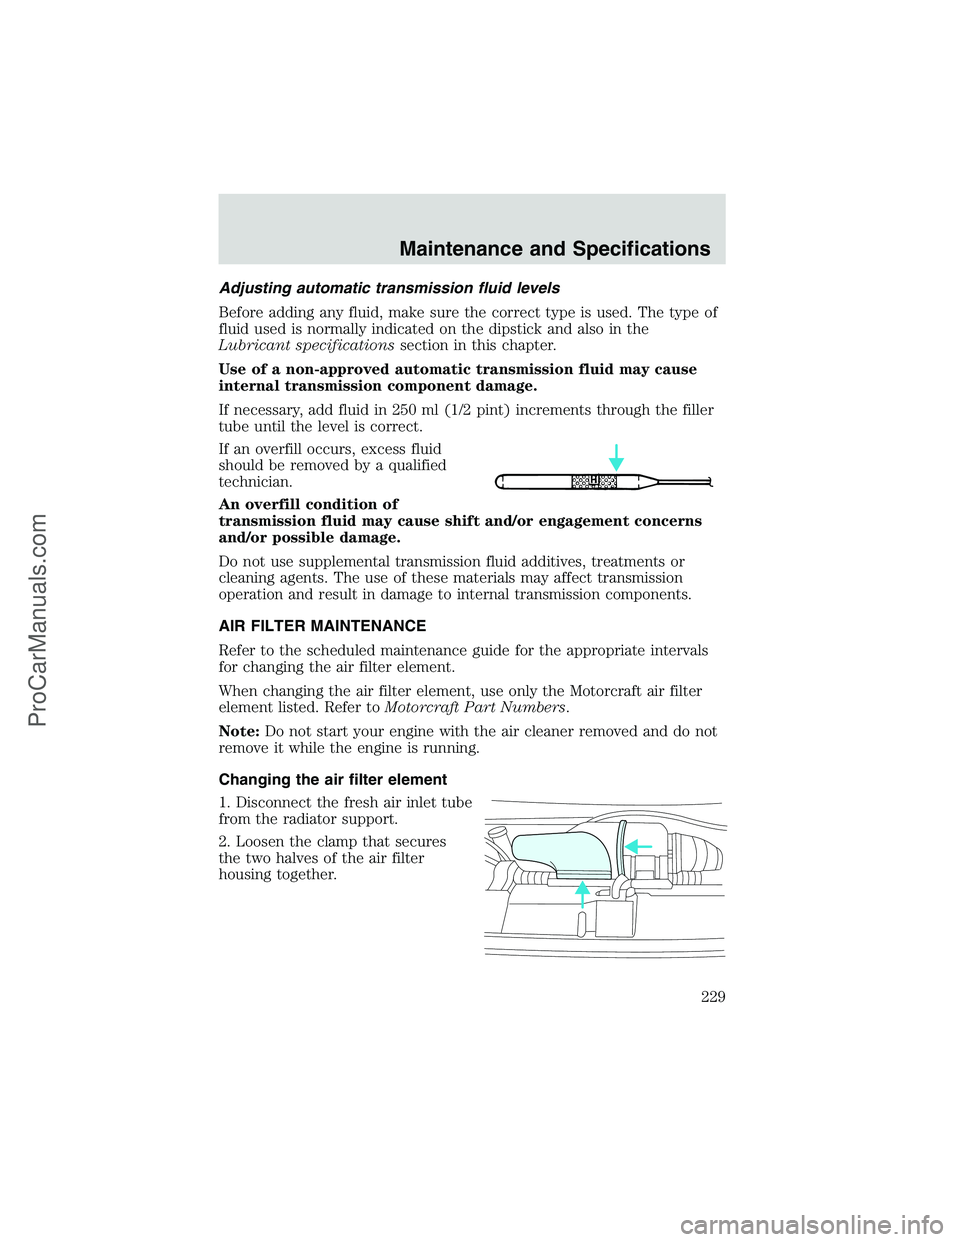 FORD E-350 2002 Service Manual Adjusting automatic transmission fluid levels
Before adding any fluid, make sure the correct type is used. The type of
fluid used is normally indicated on the dipstick and also in the
Lubricant specif